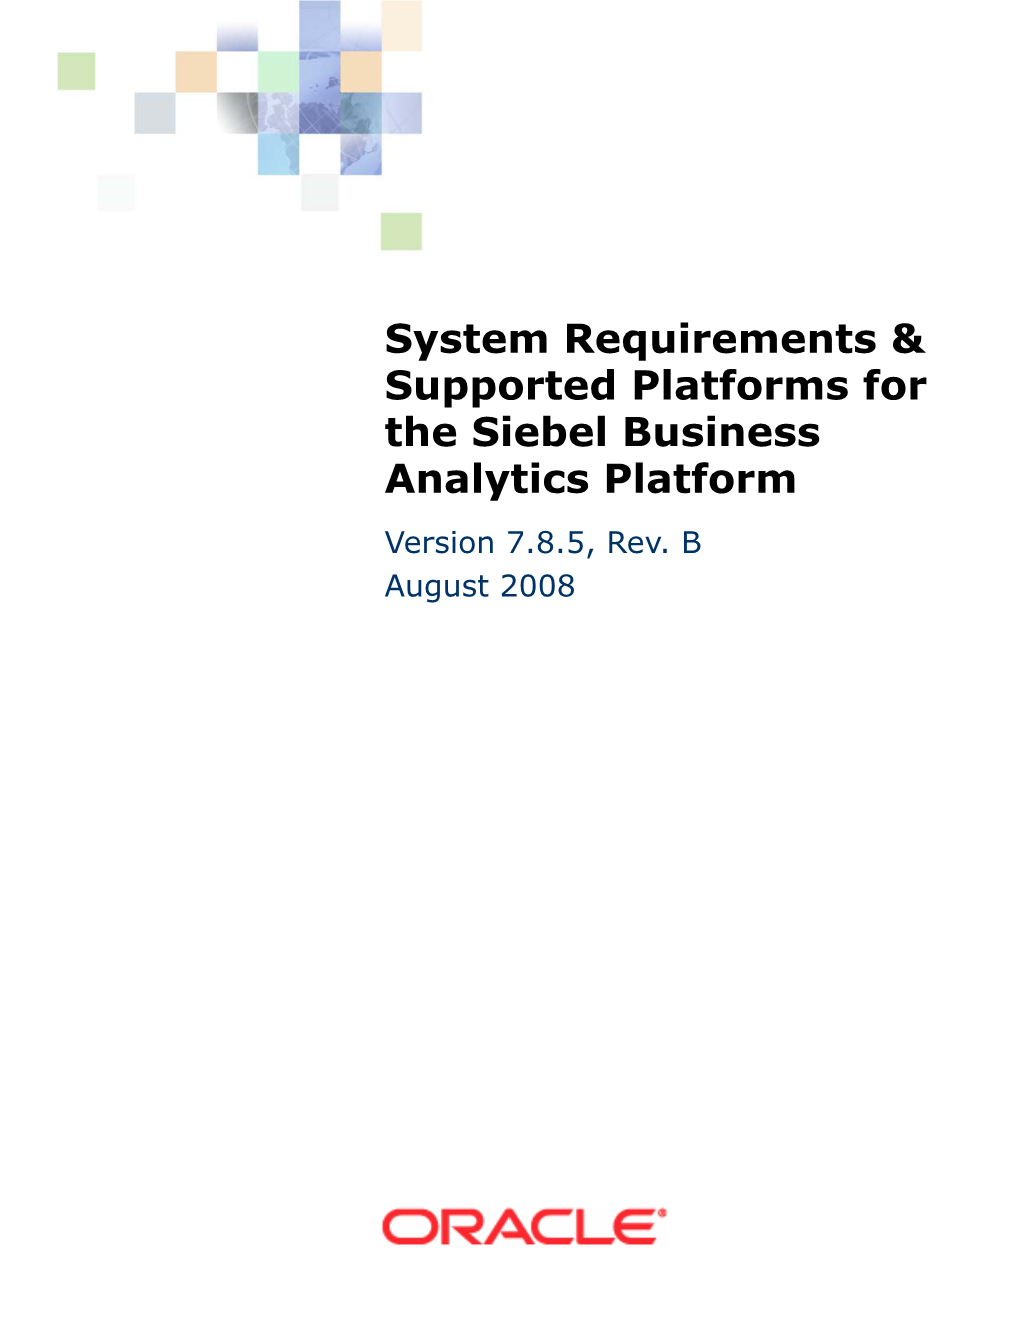 System Requirements & Supported Platforms for the Siebel Business Analytics Platform, Version 7.8.5